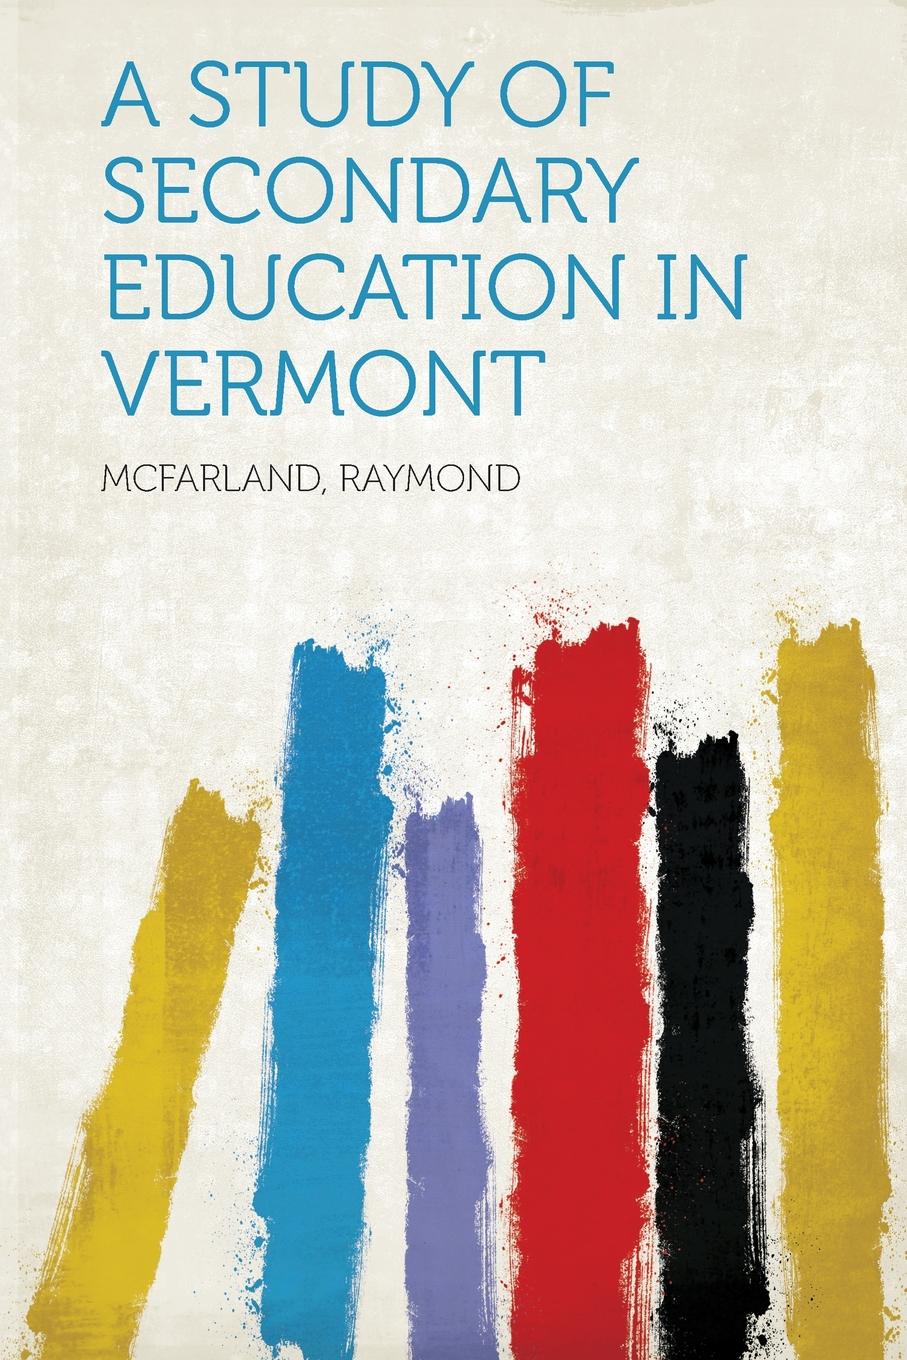 A Study of Secondary Education in Vermont